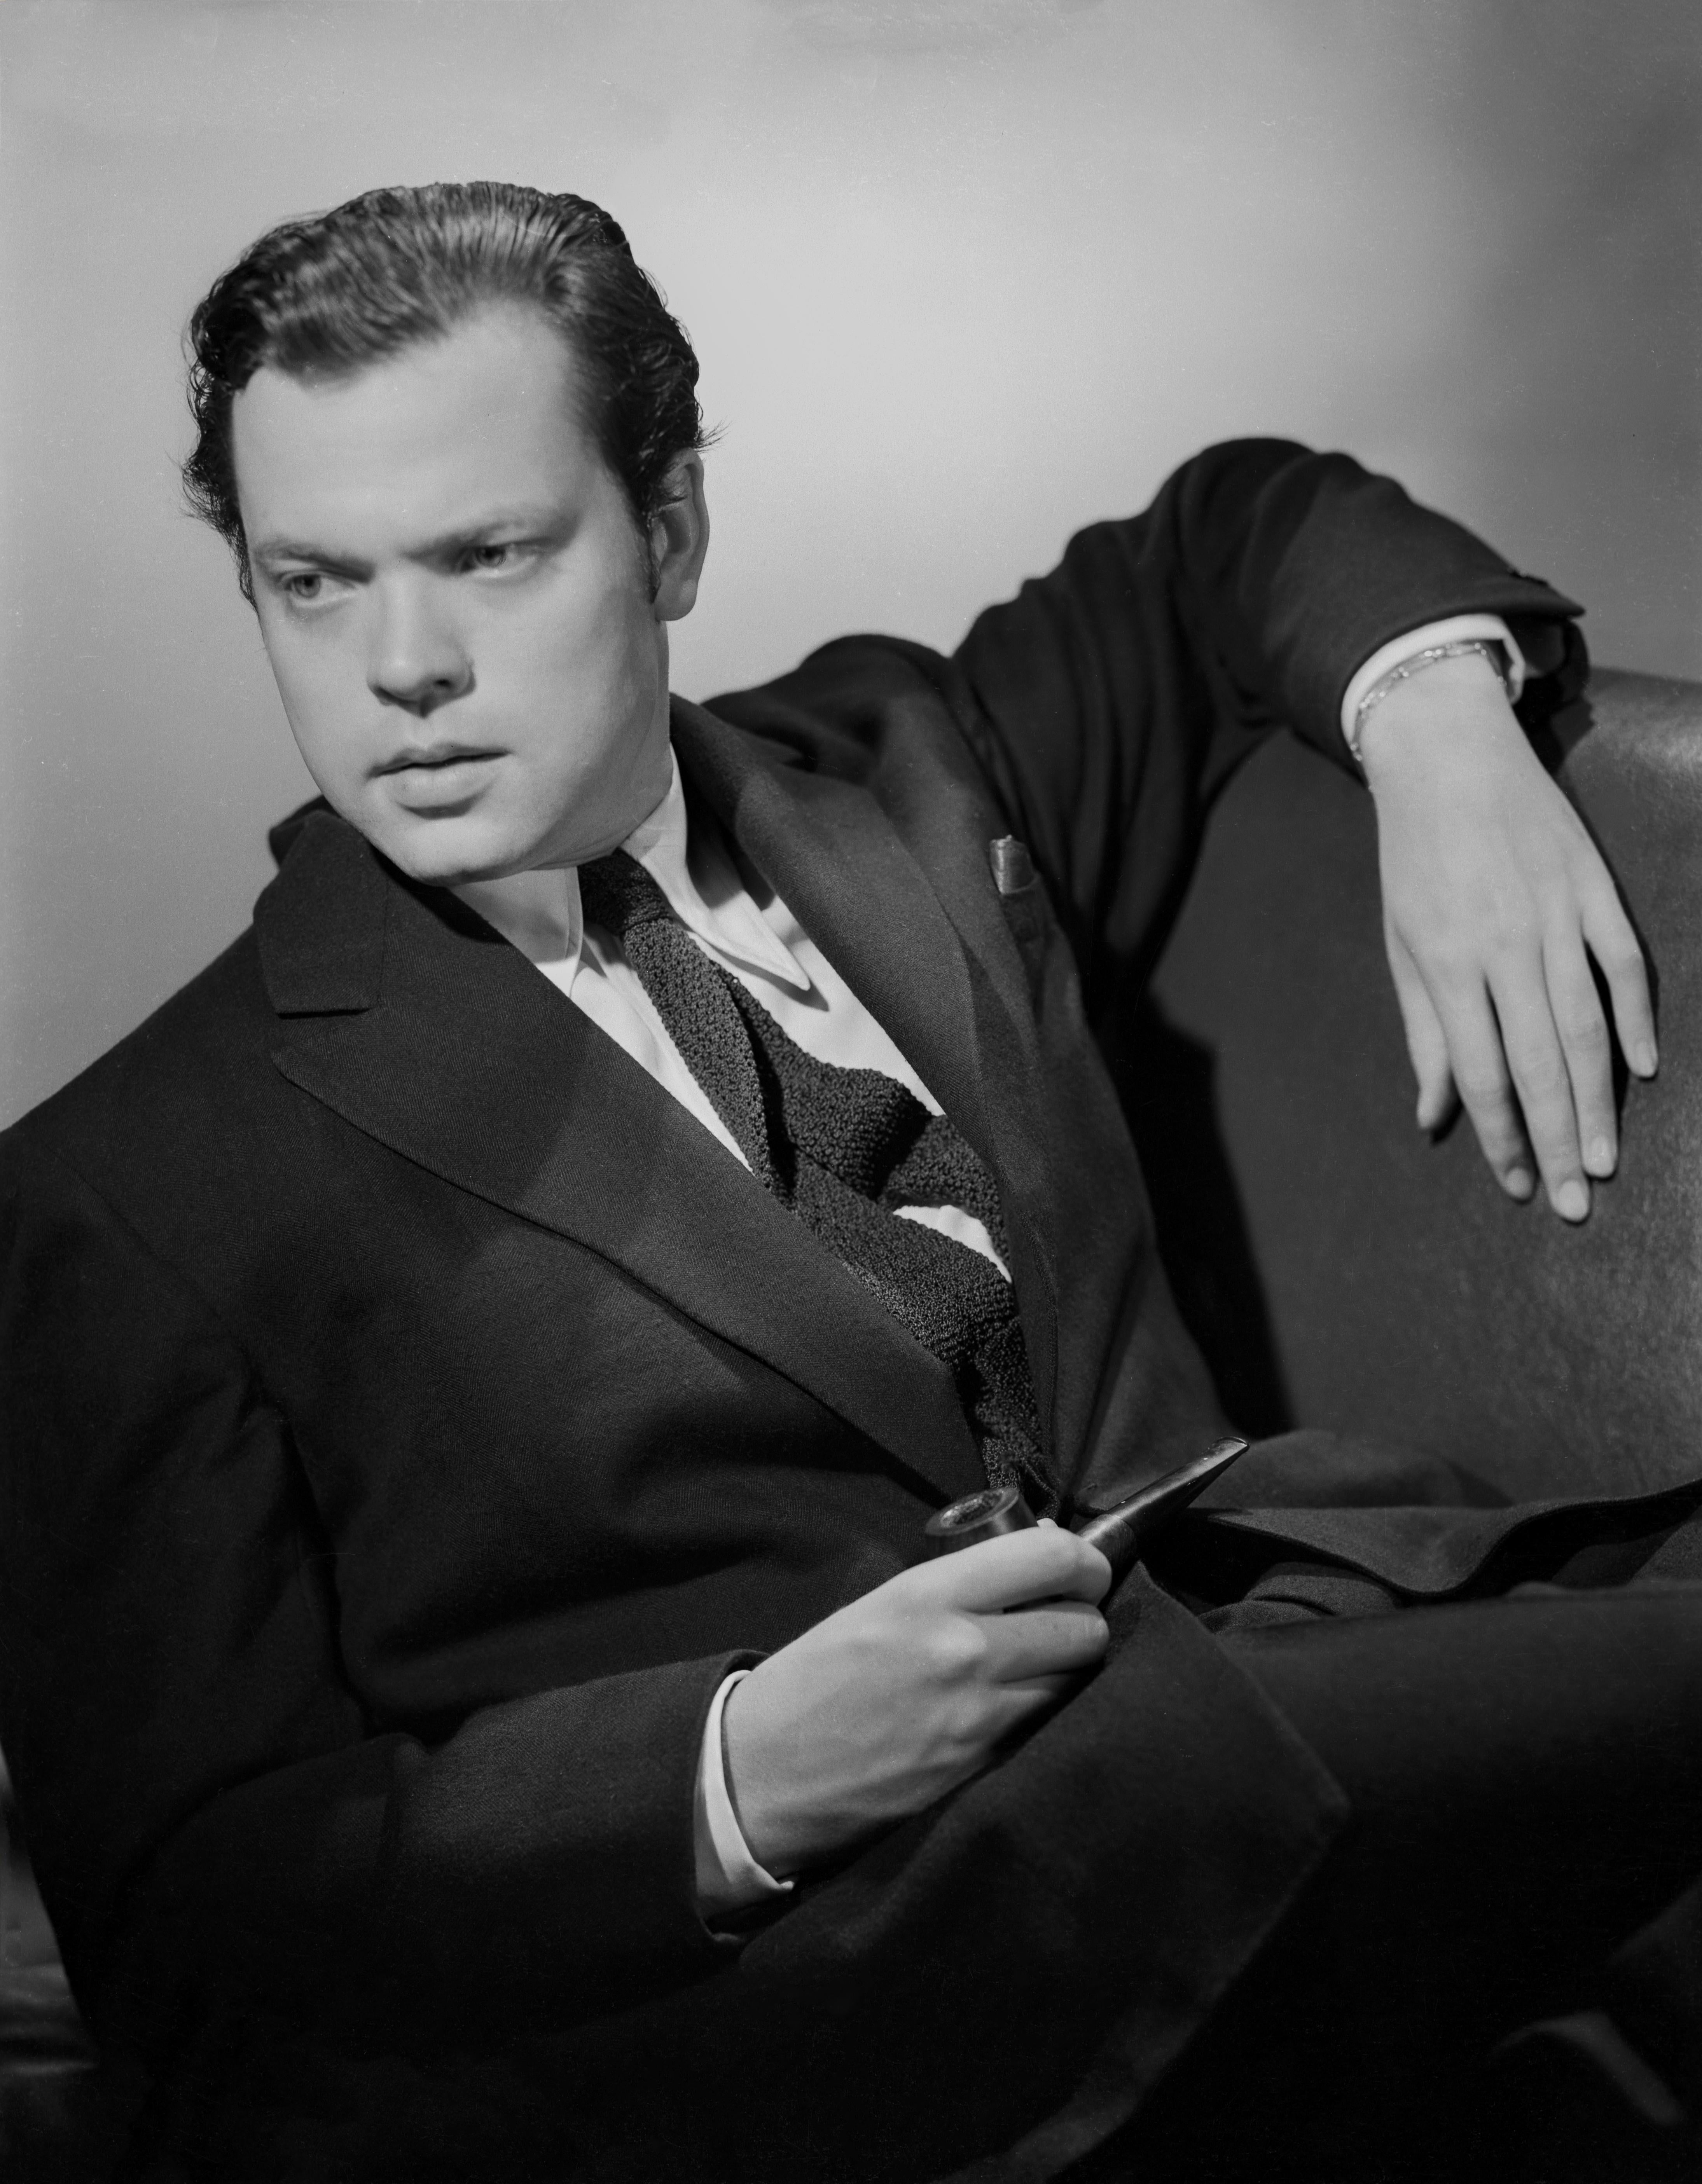 Unknown Portrait Photograph - Orson Welles Leaning in the Studio Movie Star News Fine Art Print